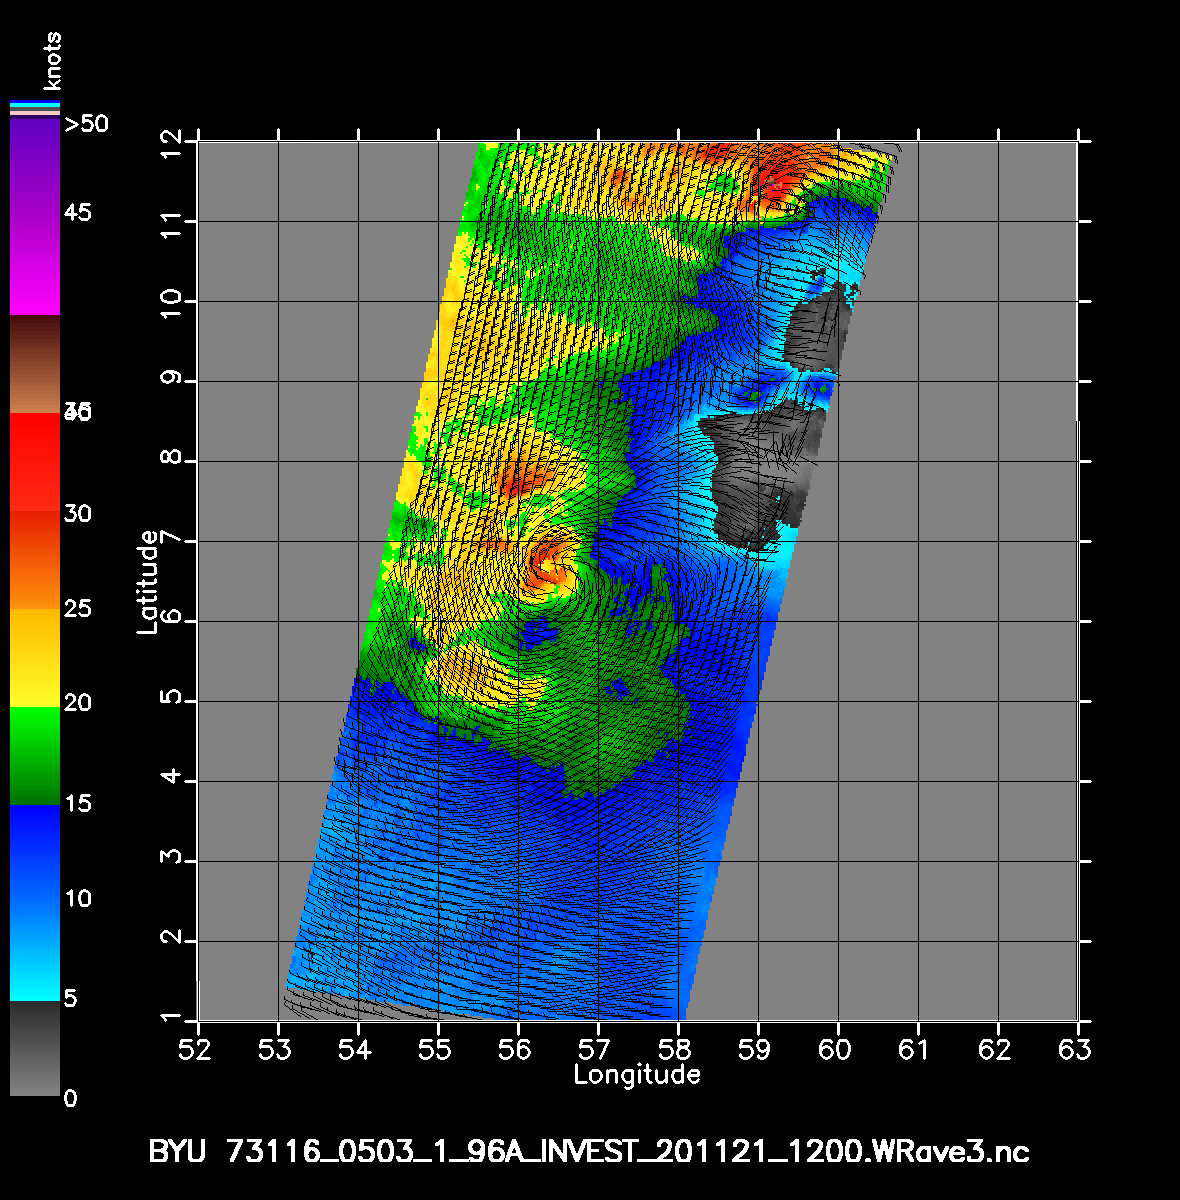 20201121.120000.ASCAT.mta.r73116.wrave3.96A.INVEST.gif